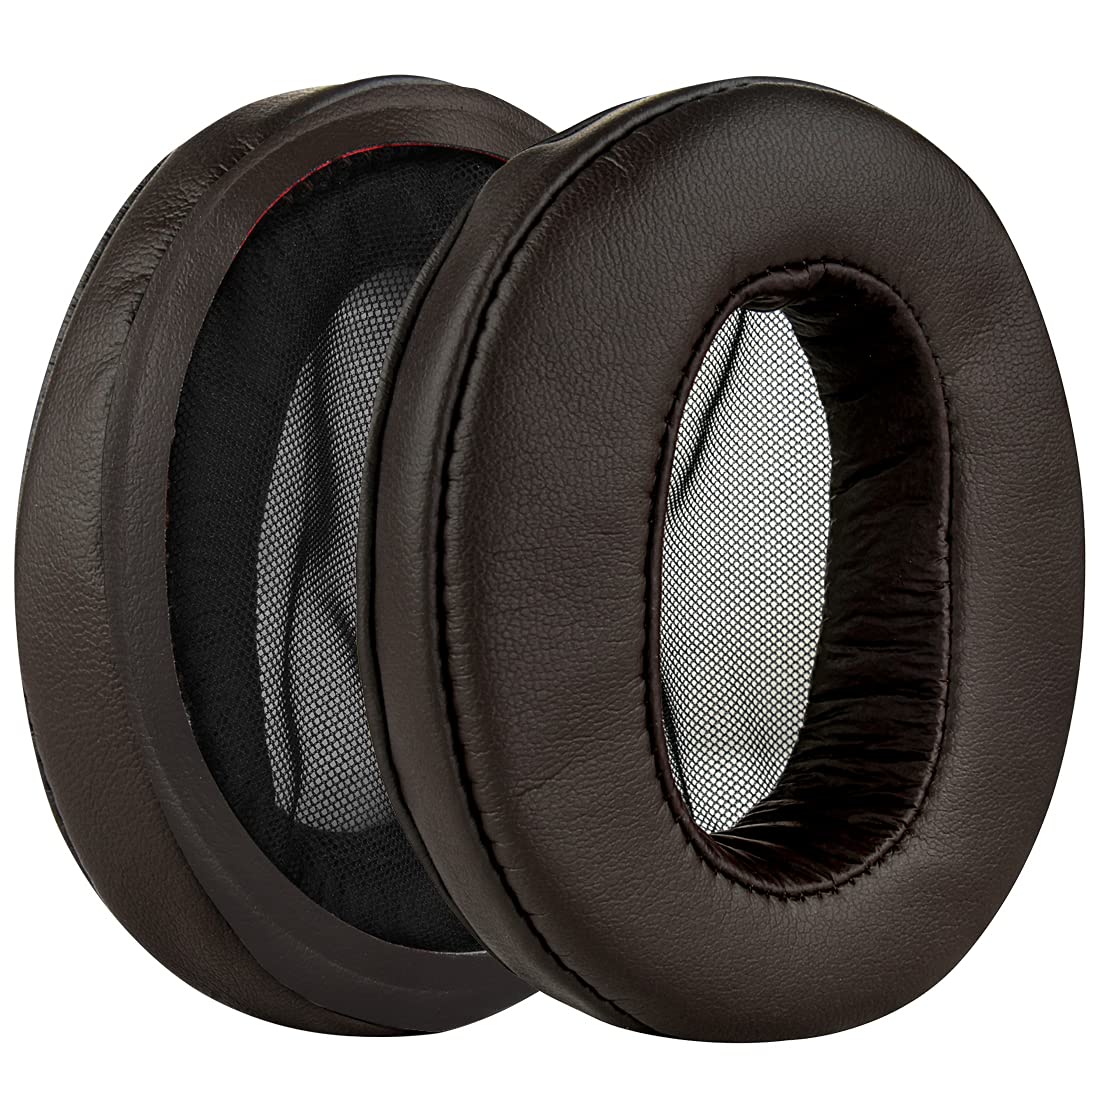 Geekria QuickFit Replacement Ear Pads for Sony MDR-1ABT, MDR-1RBT, MDR-1RNC Headphones Ear Cushions, Headset Earpads, Ear Cups Cover Repair Parts (Brown)